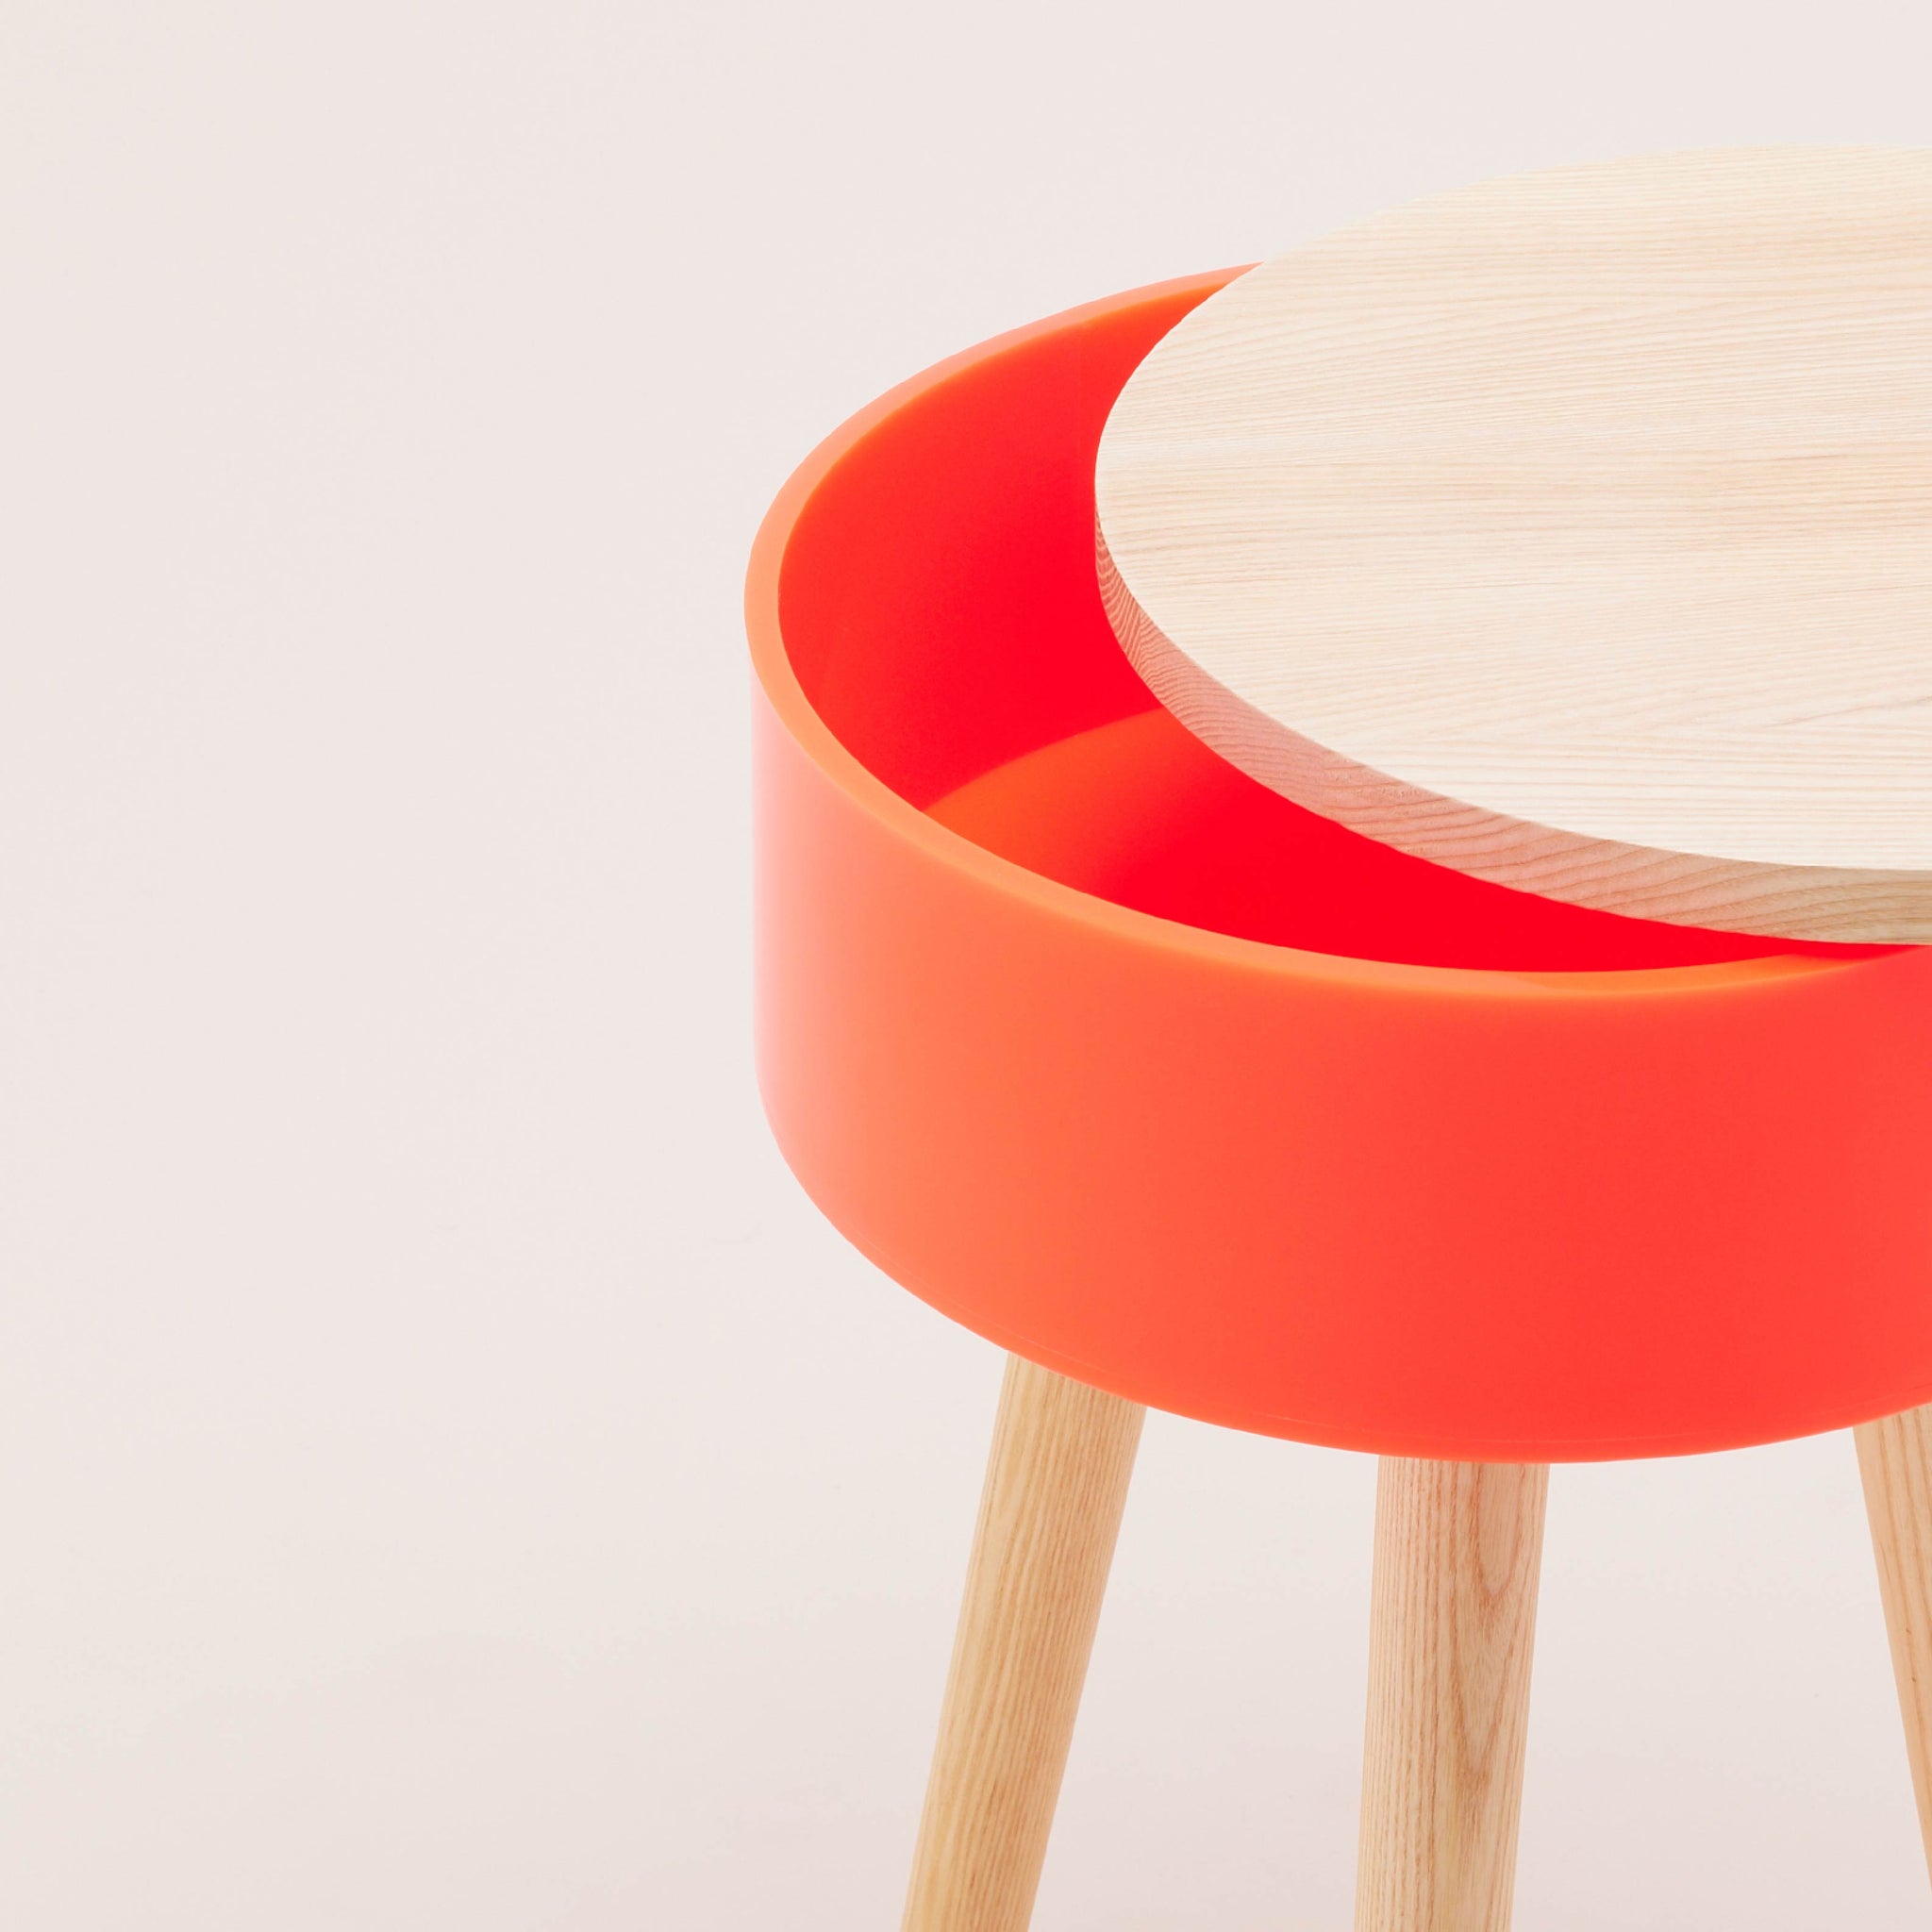 Lund London Skittle Table (Size M) | โต๊ะข้าง